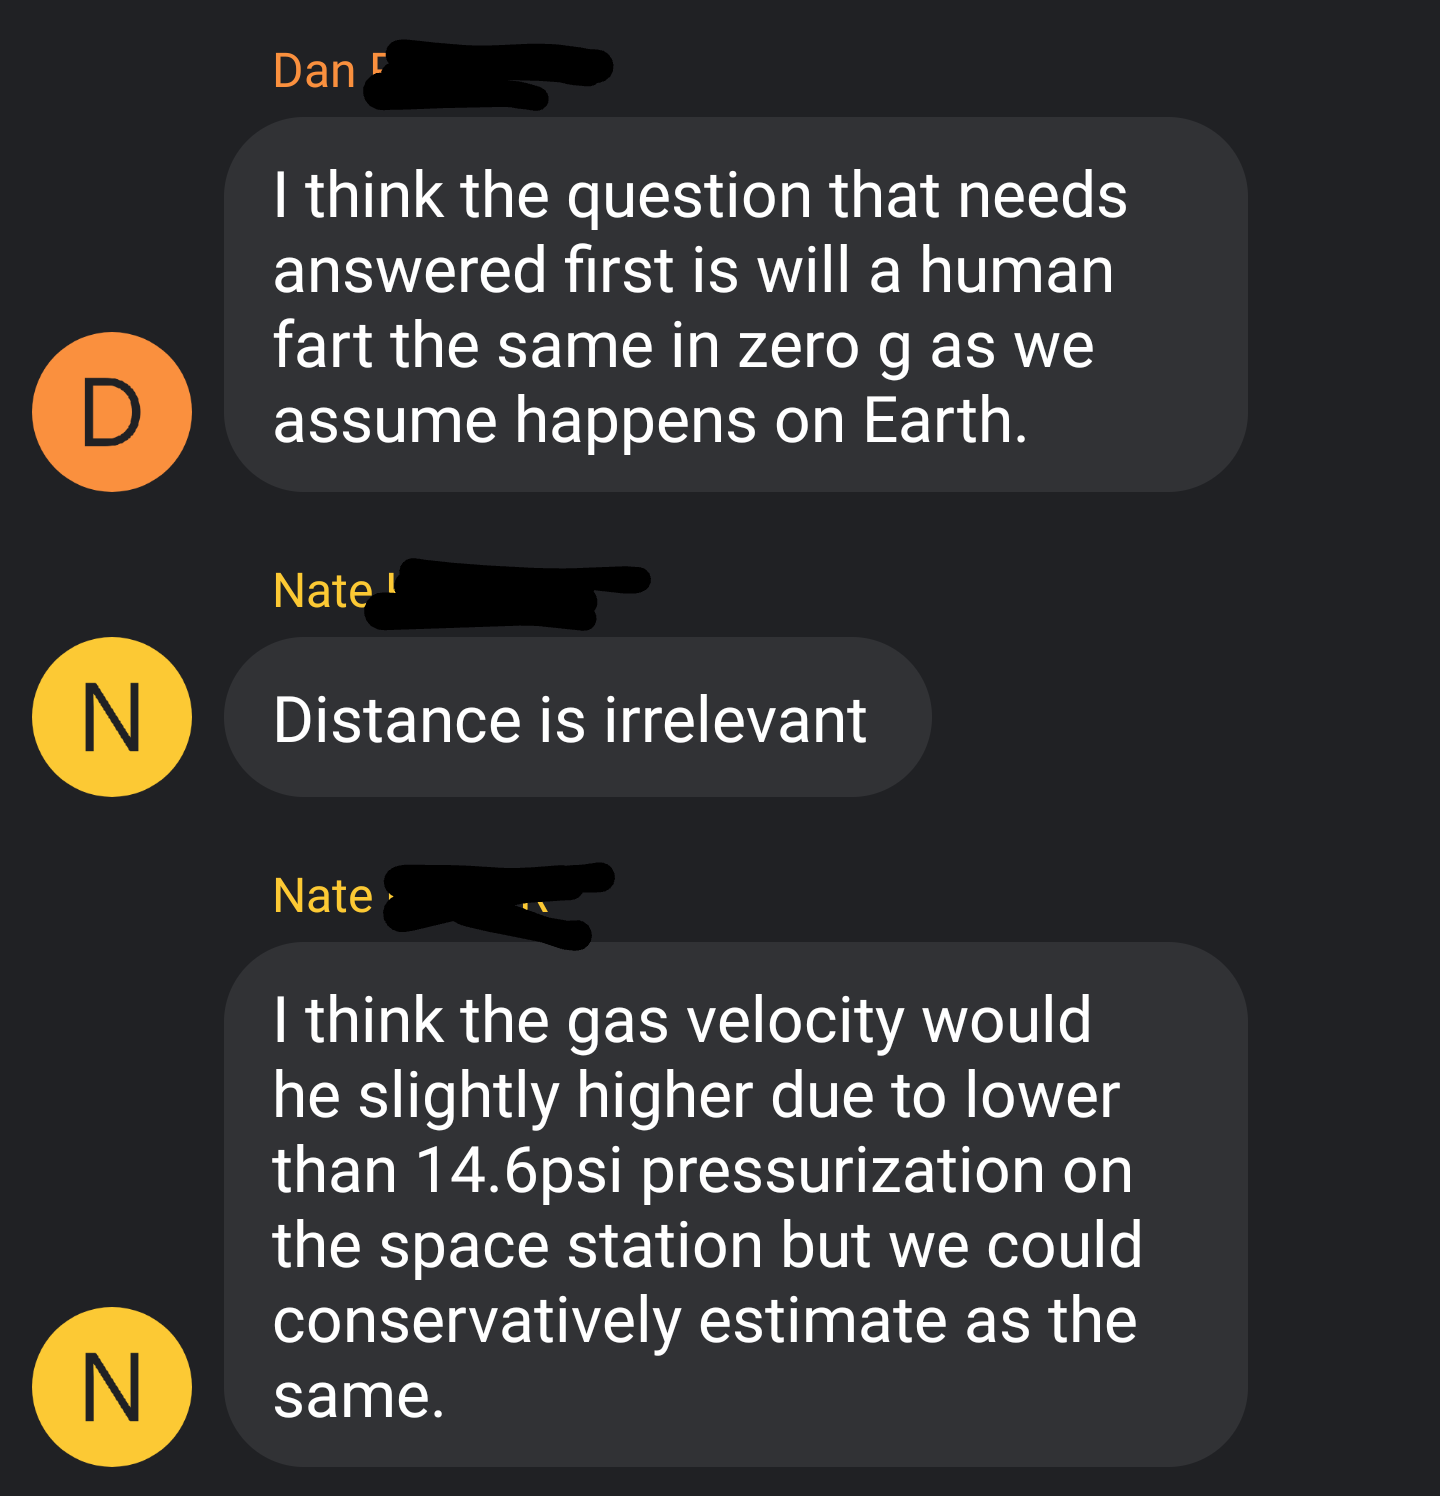 snow software - Dan I think the question that needs answered first is will a human fart the same in zero g as we assume happens on Earth. Nate' Distance is irrelevant Nate I think the gas velocity would he slightly higher due to lower than 14.6psi pressur